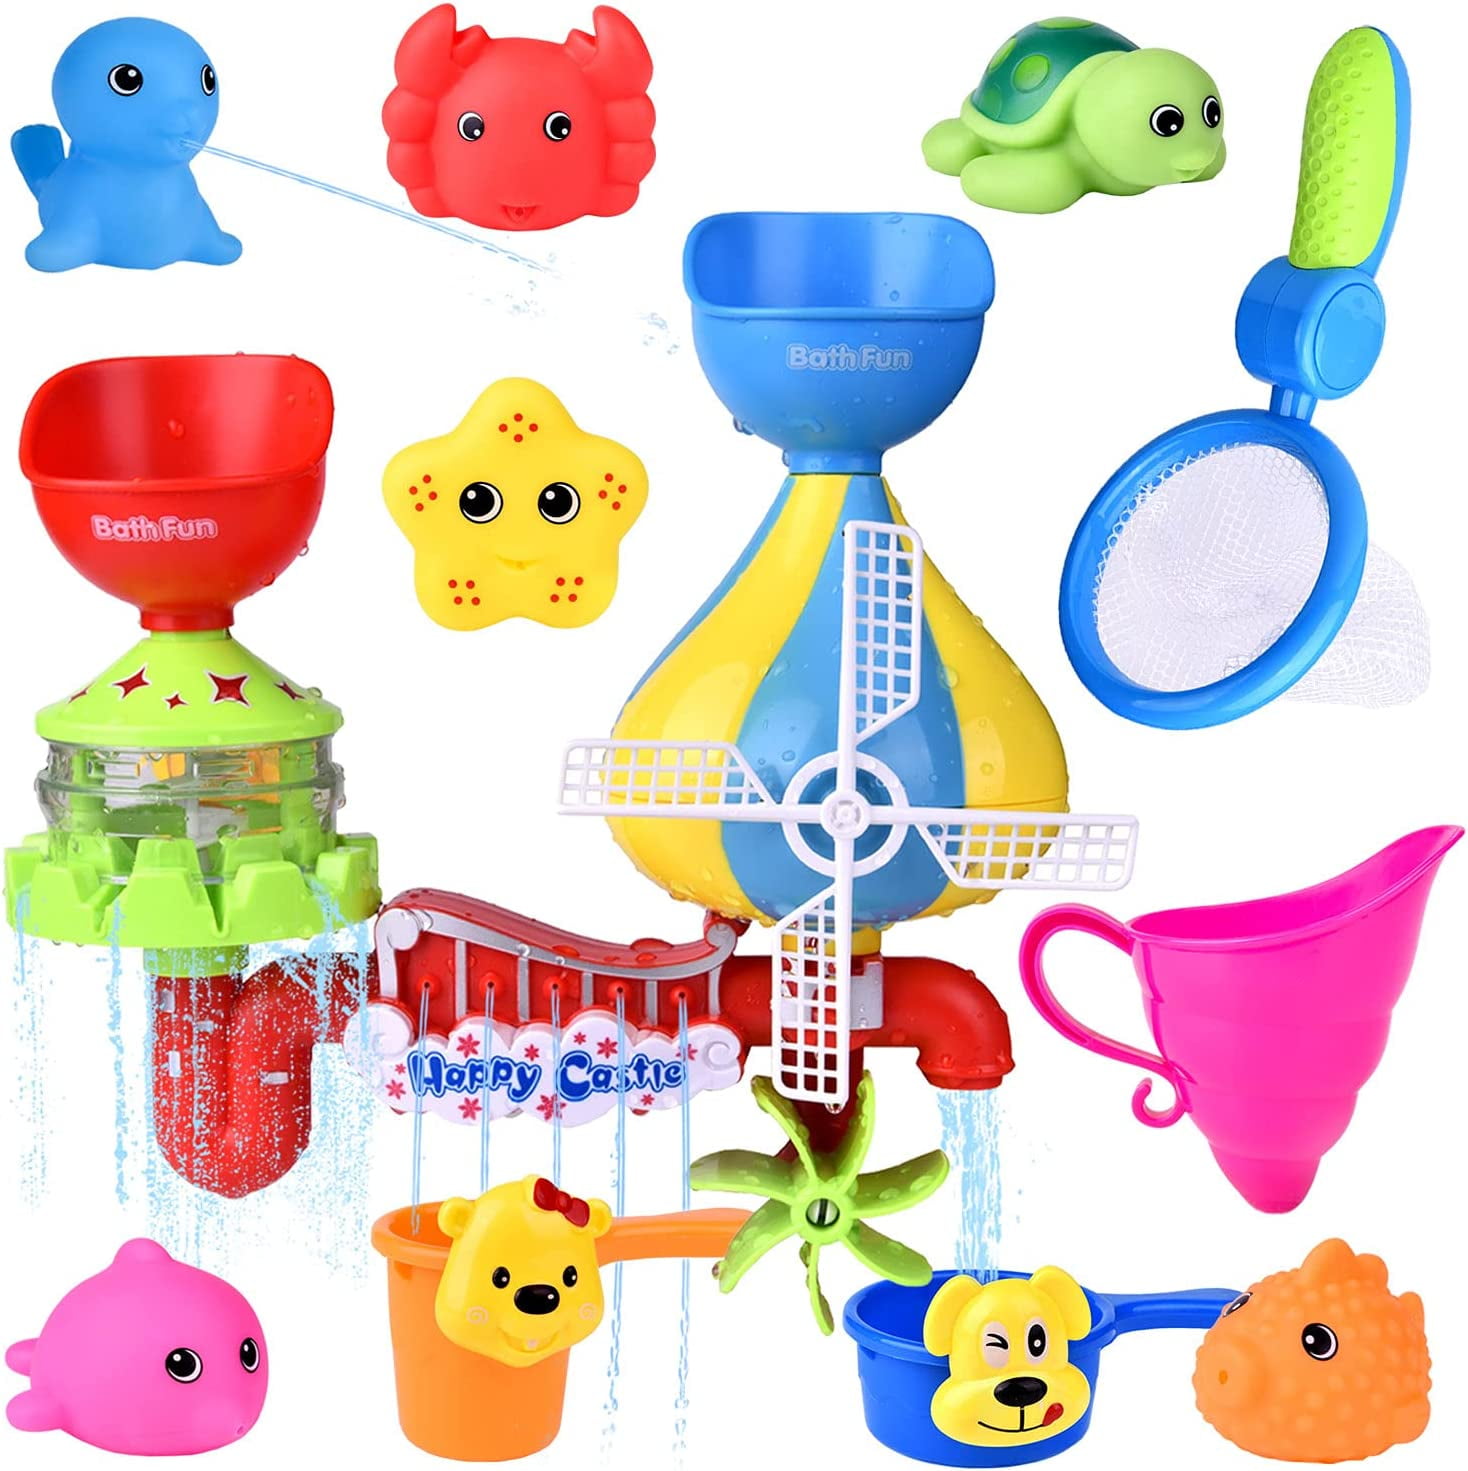 Fun Little Toys 11 Pcs Baby Bath Toy -Waterfall Water Station with